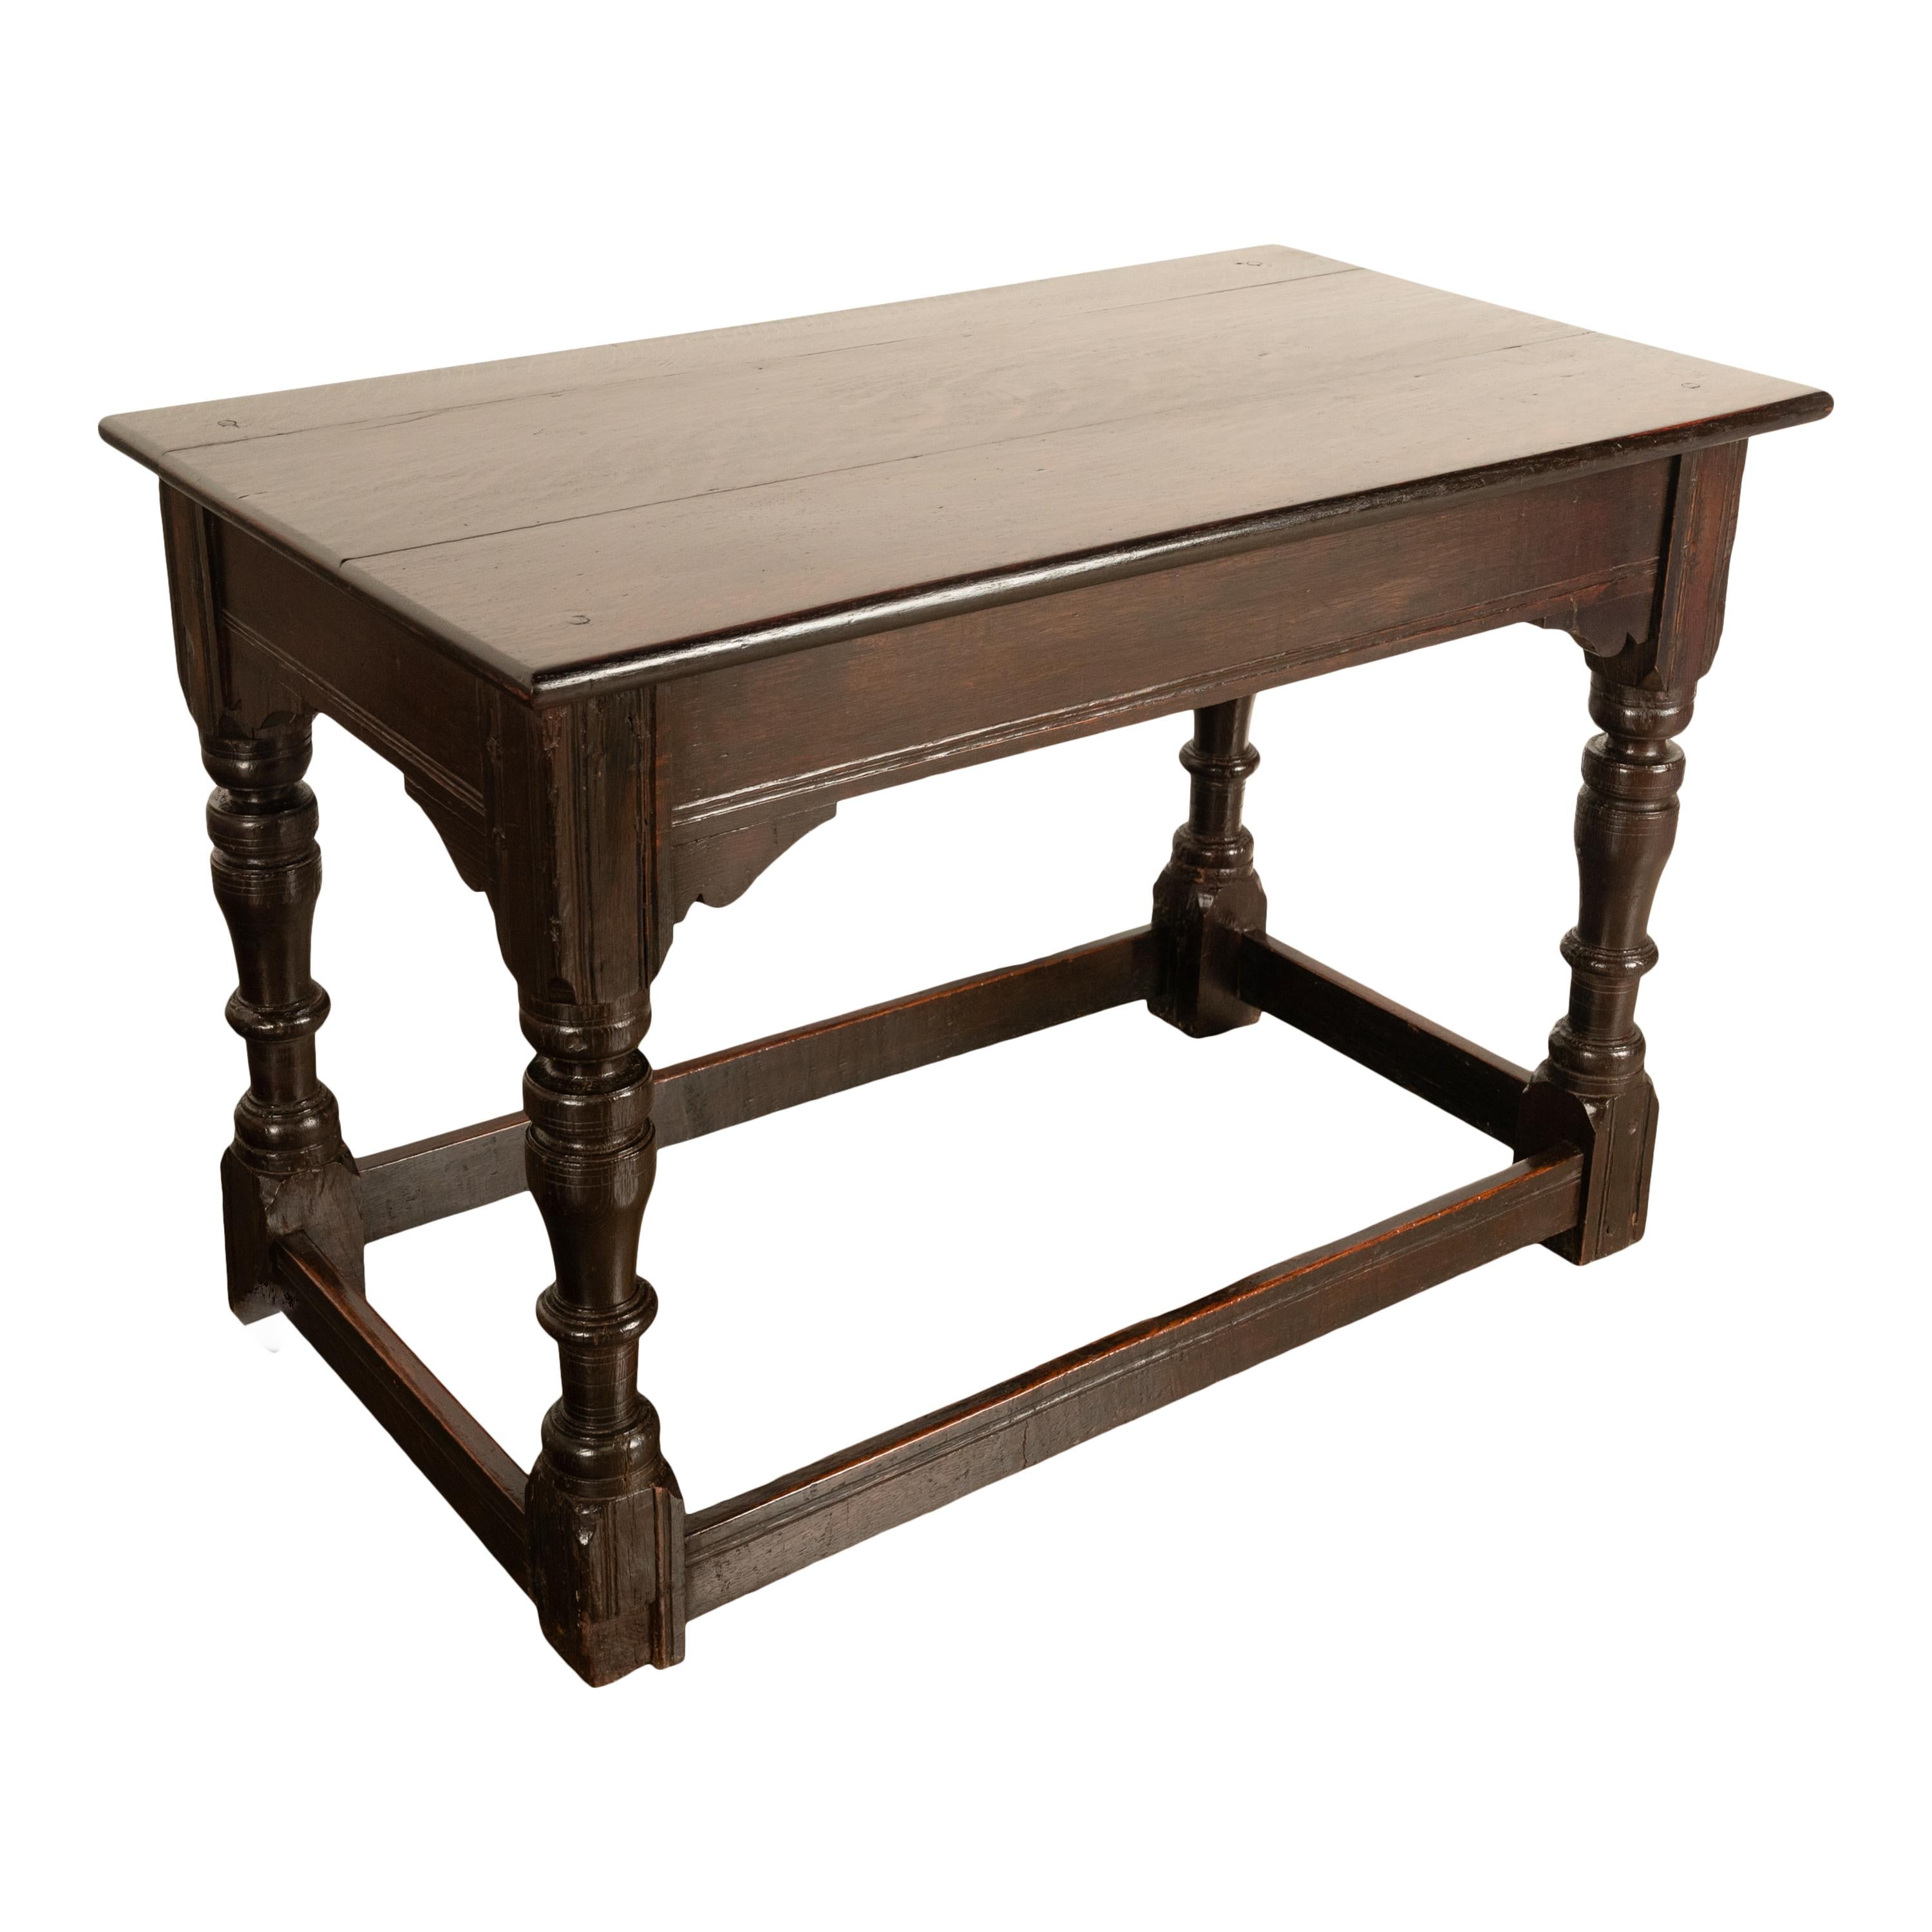 A good antique English 17th Century country oak refectory or serving table, circa 1680.
The table dates from the reign of King Charles II, referred to as the Restoration period after the Cromwellian Period when the Stuart monarchy was restored to